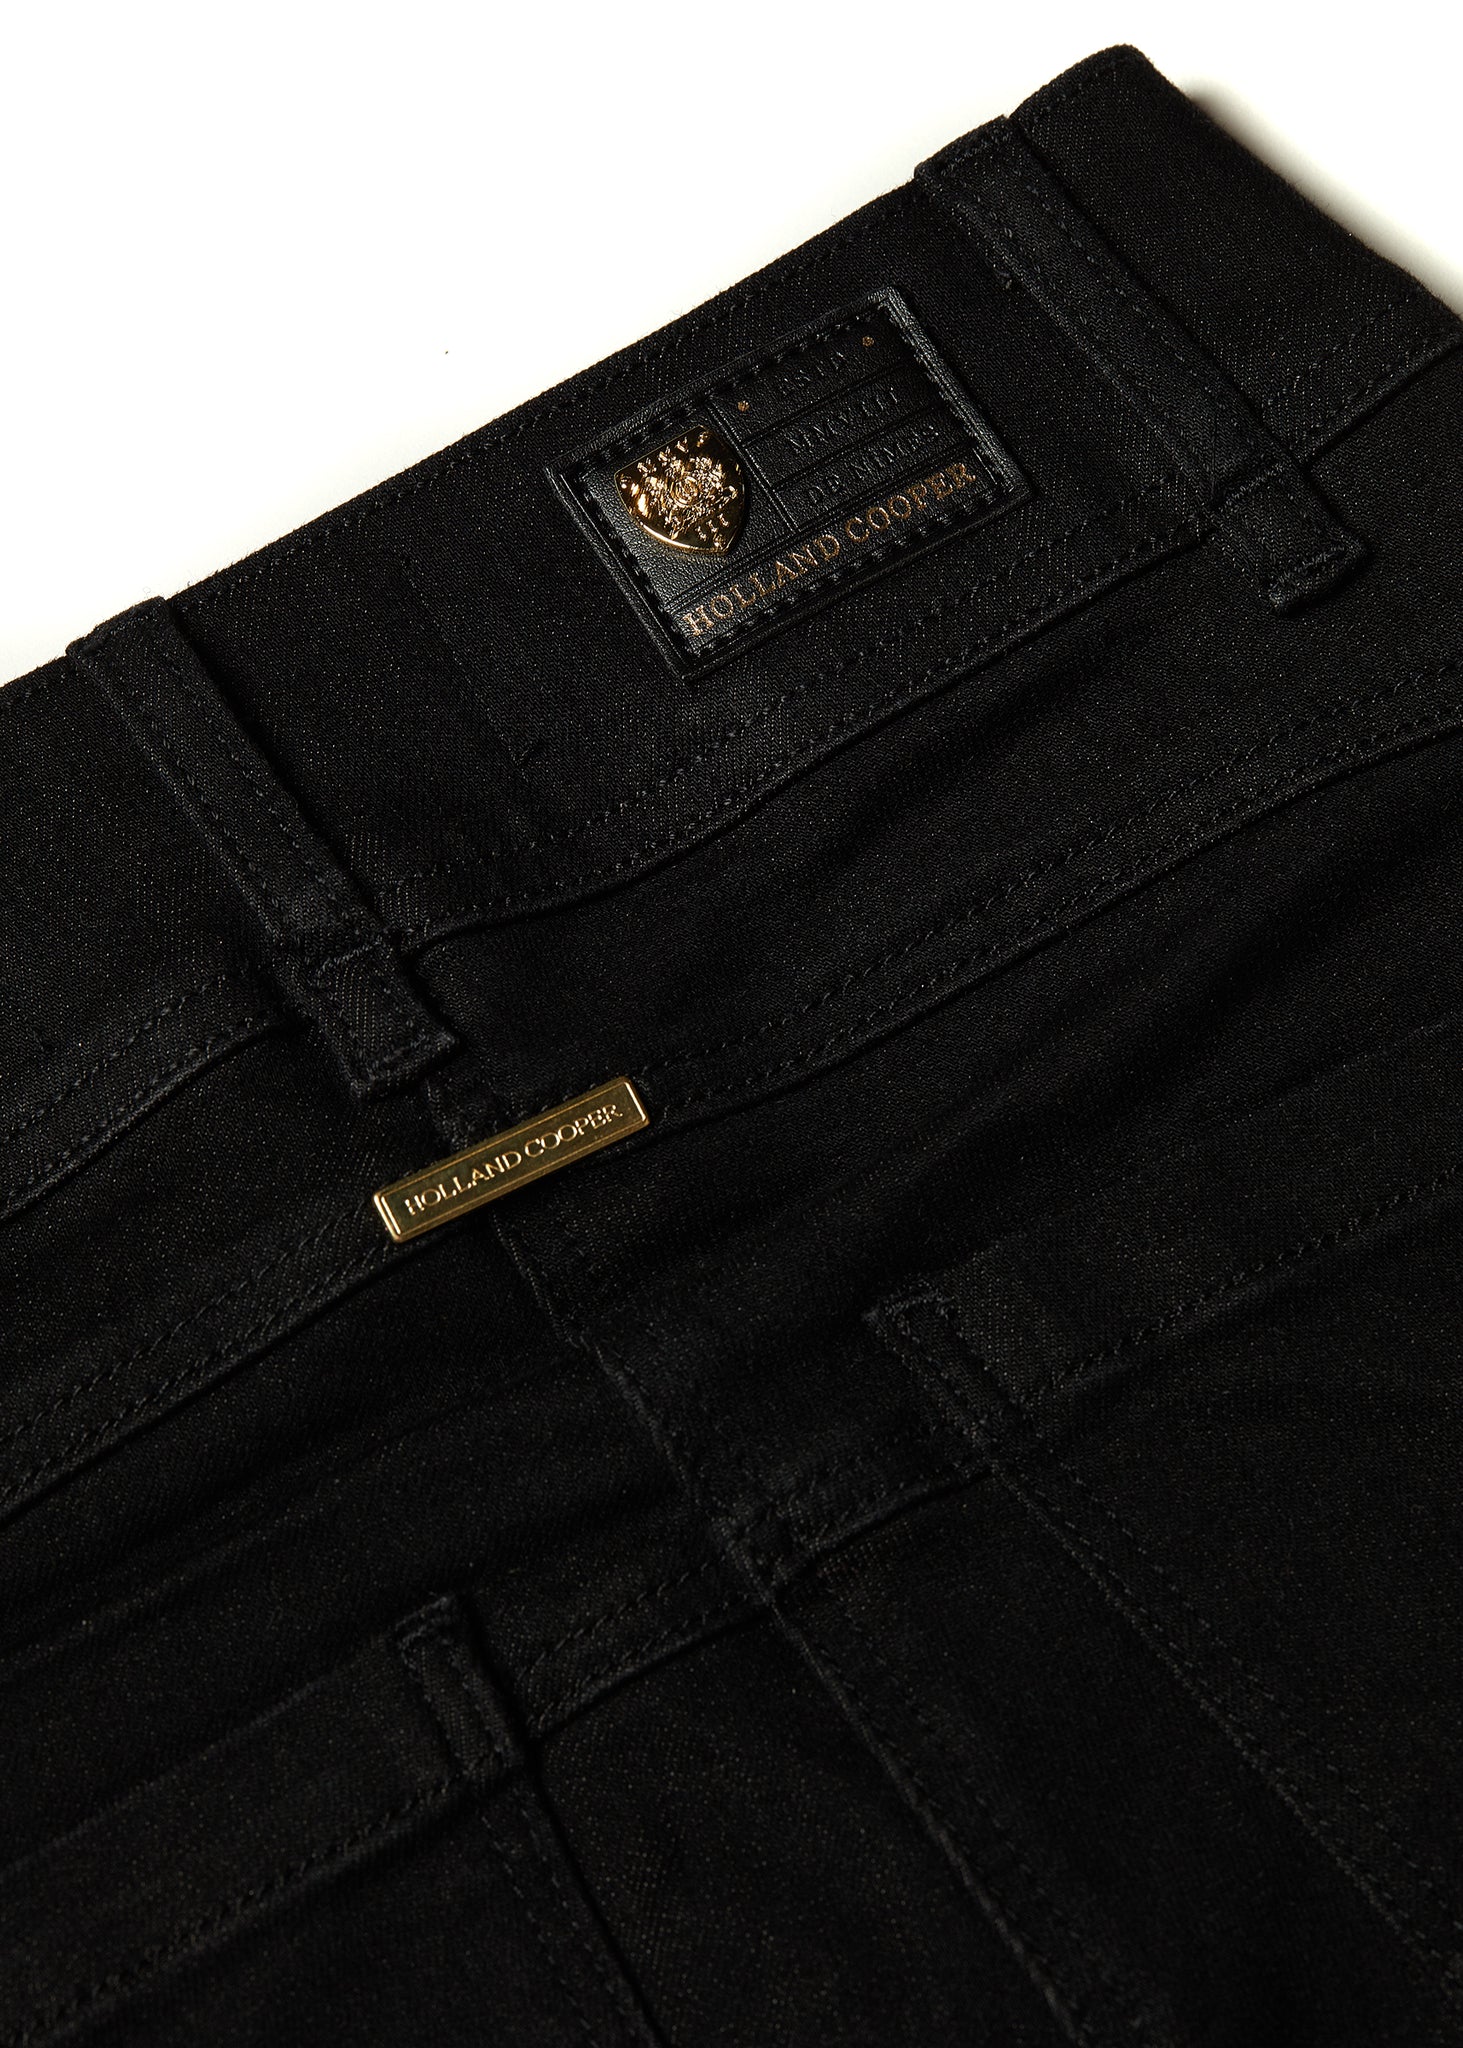 gold hardware detail on back of womens high rise black denim skinny stretch thermal jean with jodhpur style seams and two open pockets to the front and back with internal fleece lining and hc gold crest on front right pocket